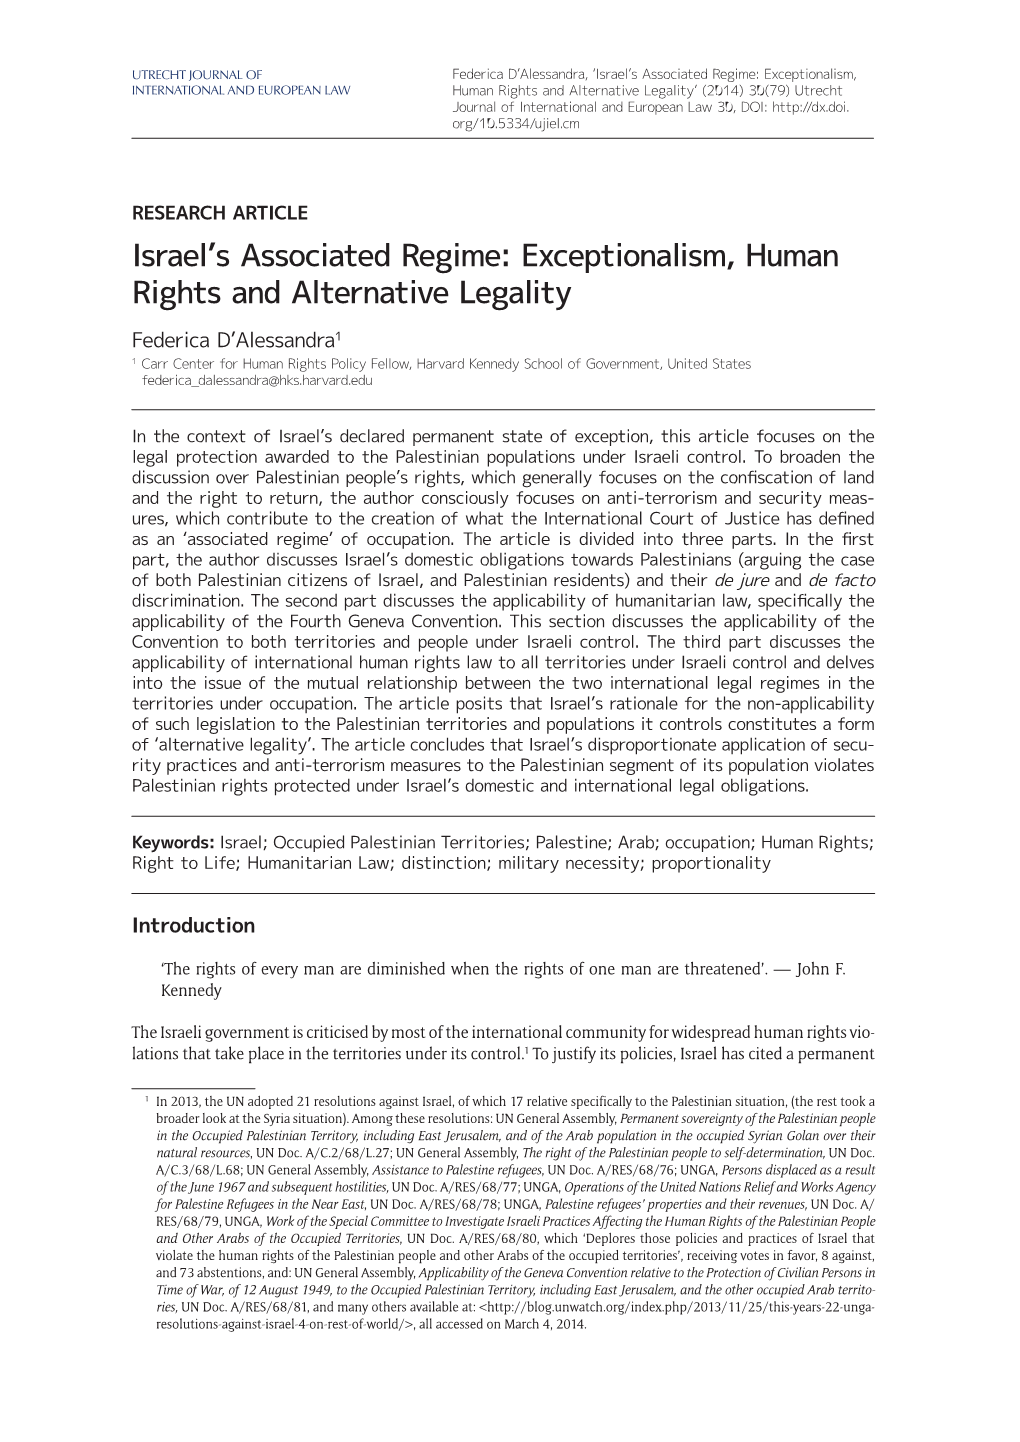 Israel's Associated Regime: Exceptionalism, Human Rights And